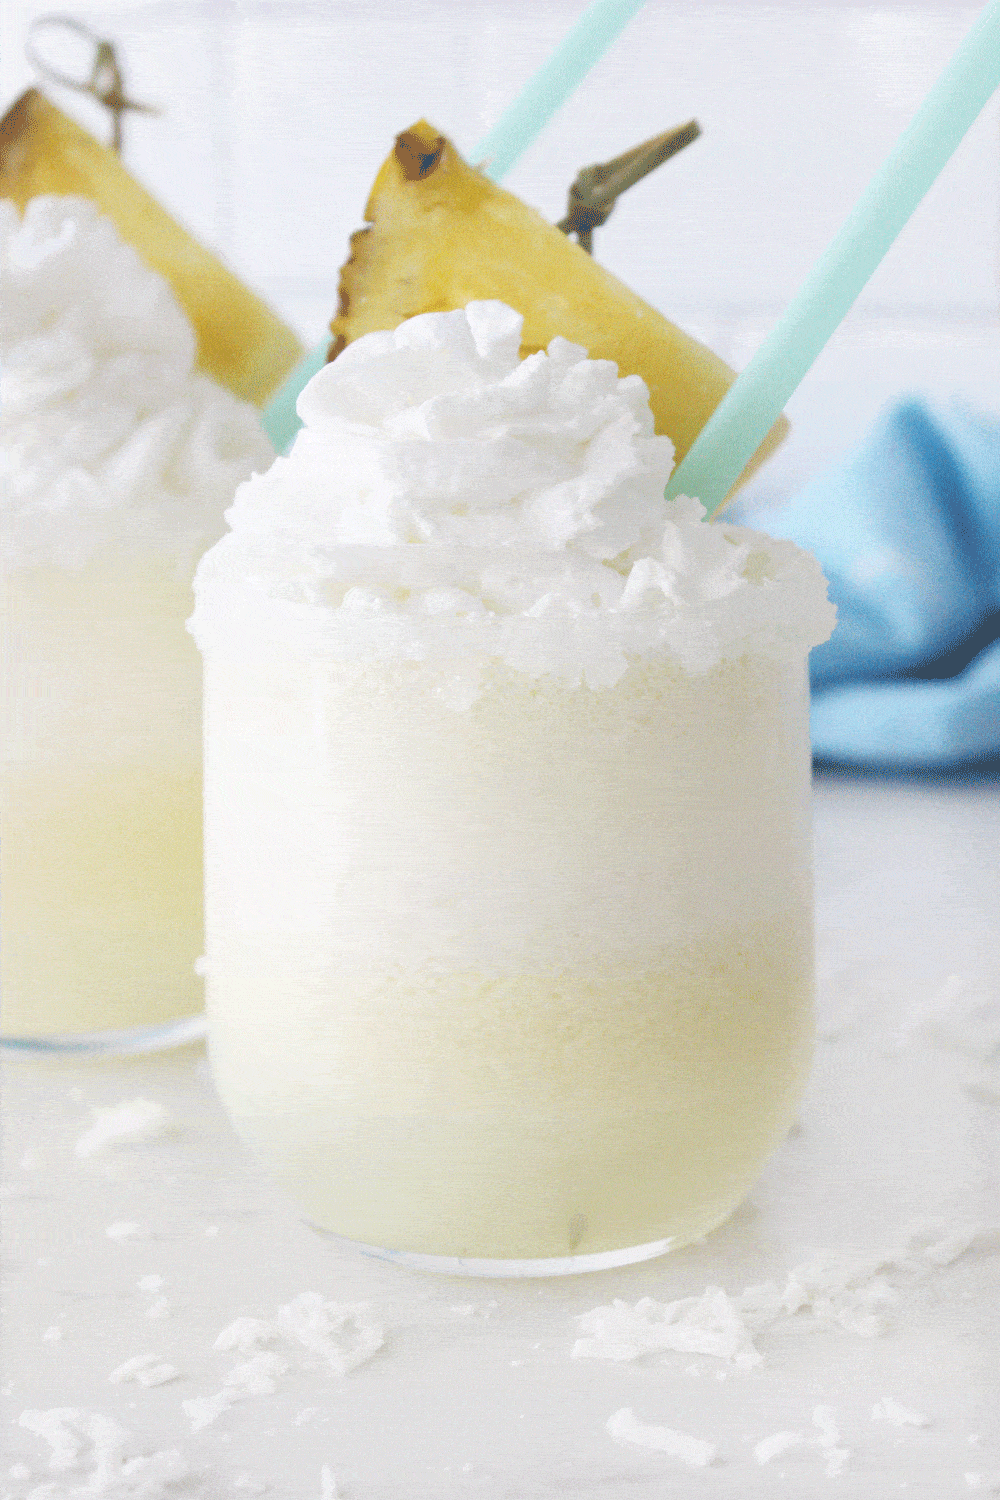 coconut pineapple whip garnished with fresh pineapple